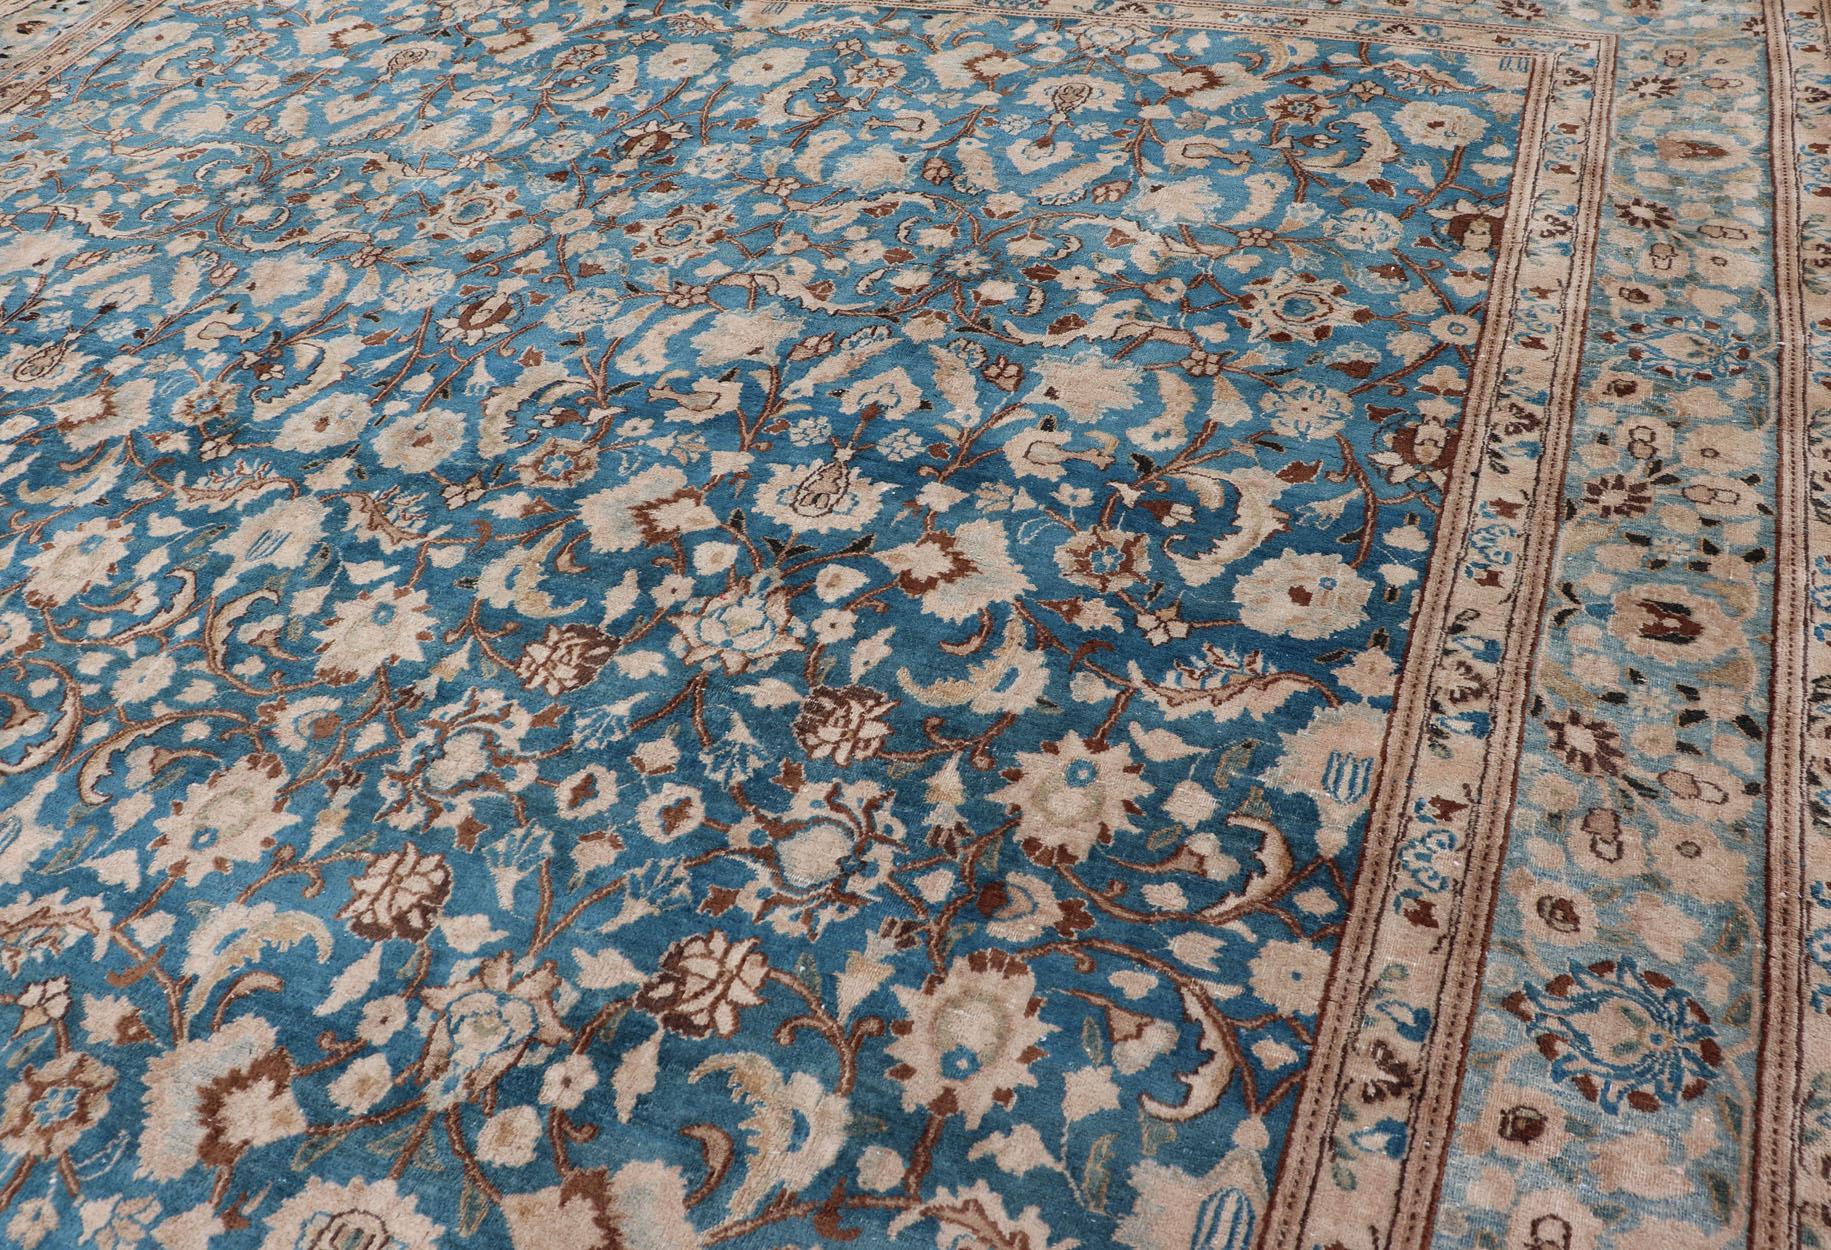 Turquoise Blue Background Antique Persian Khorassan Rug with Light Blue Border 6